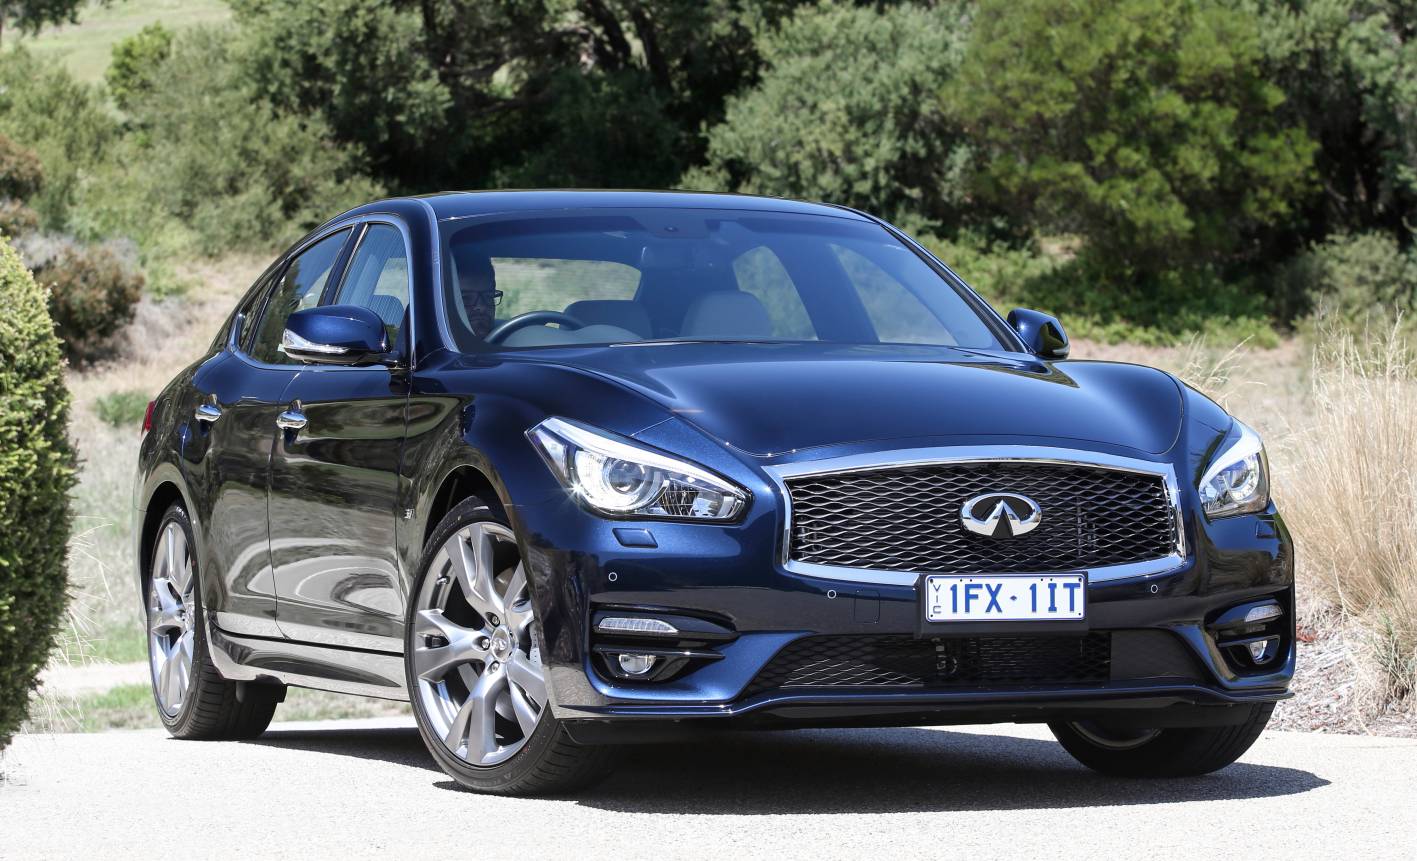 News - New Infiniti Dealerships In Sydney And Adelaide